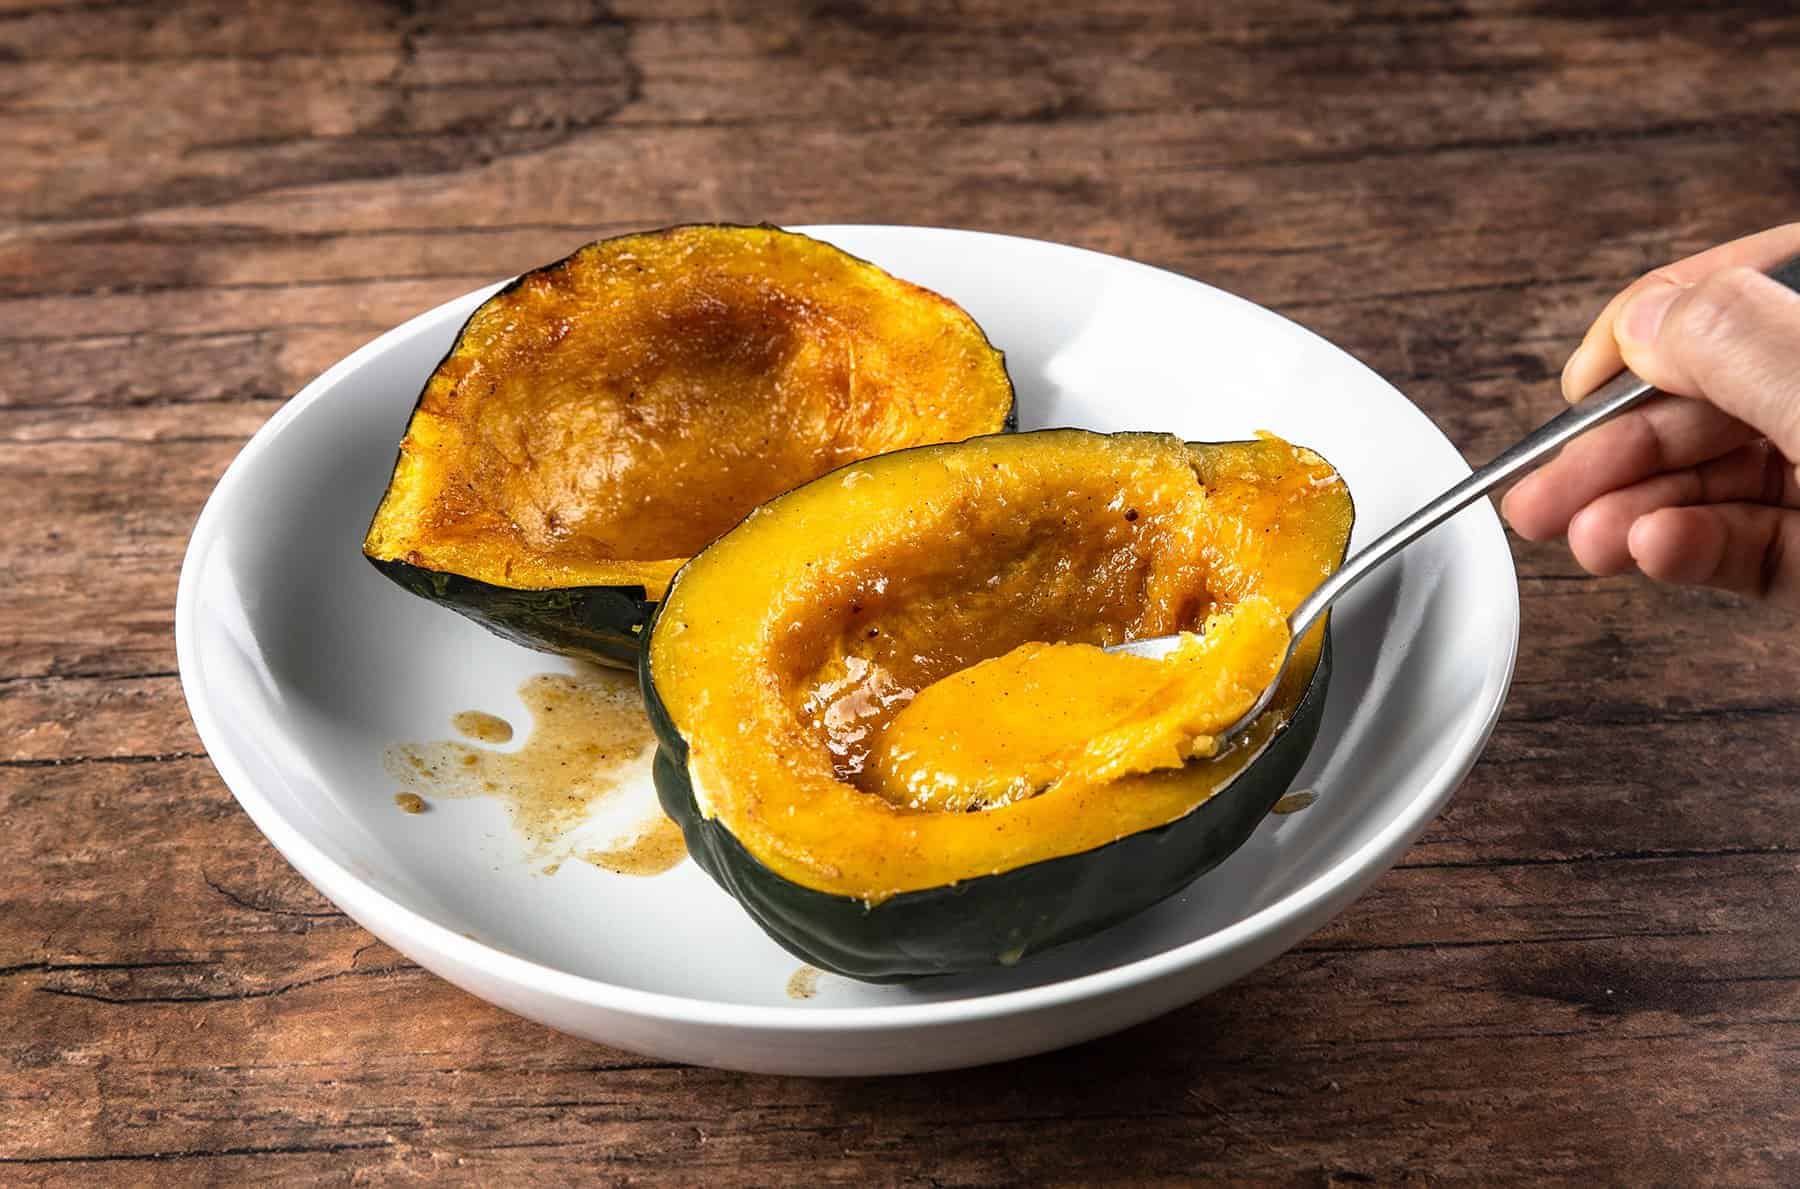 cooking acorn squash in a convection oven